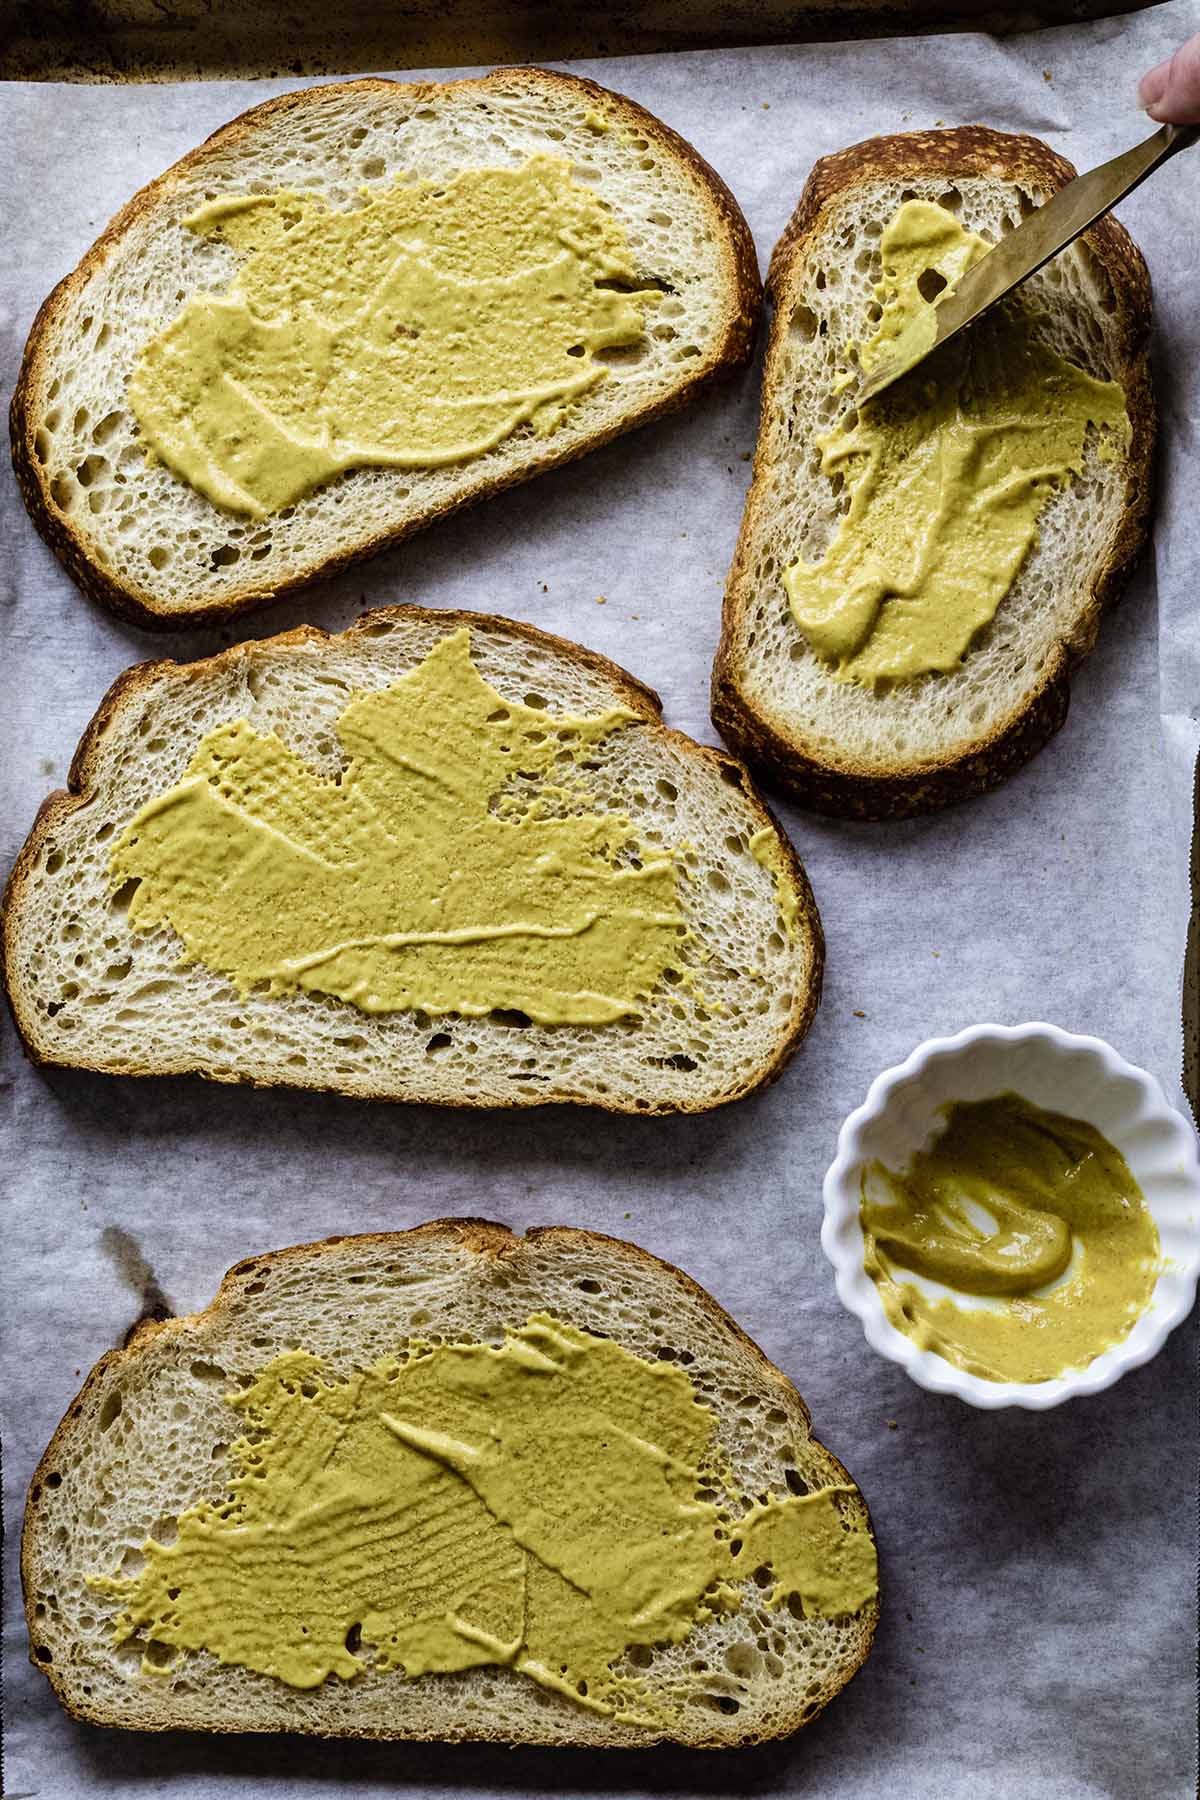 Spreading mustard on four slices of bread